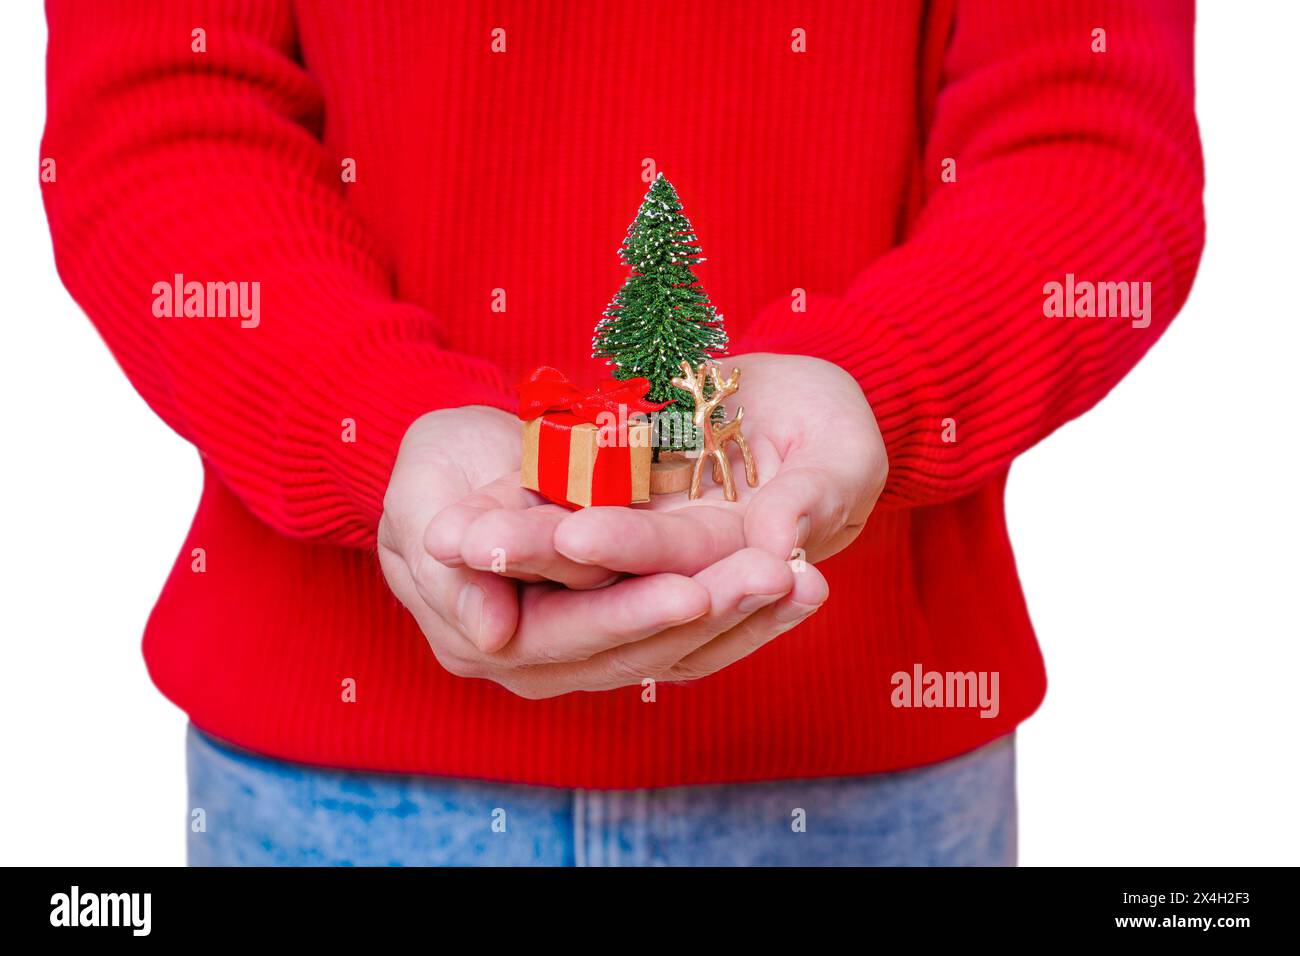 Man in red sweater and blue jeans holds a miniature Christmas scene in cradled hands including a tiny New Year tree figurine, reindeer and gift box. Stock Photo